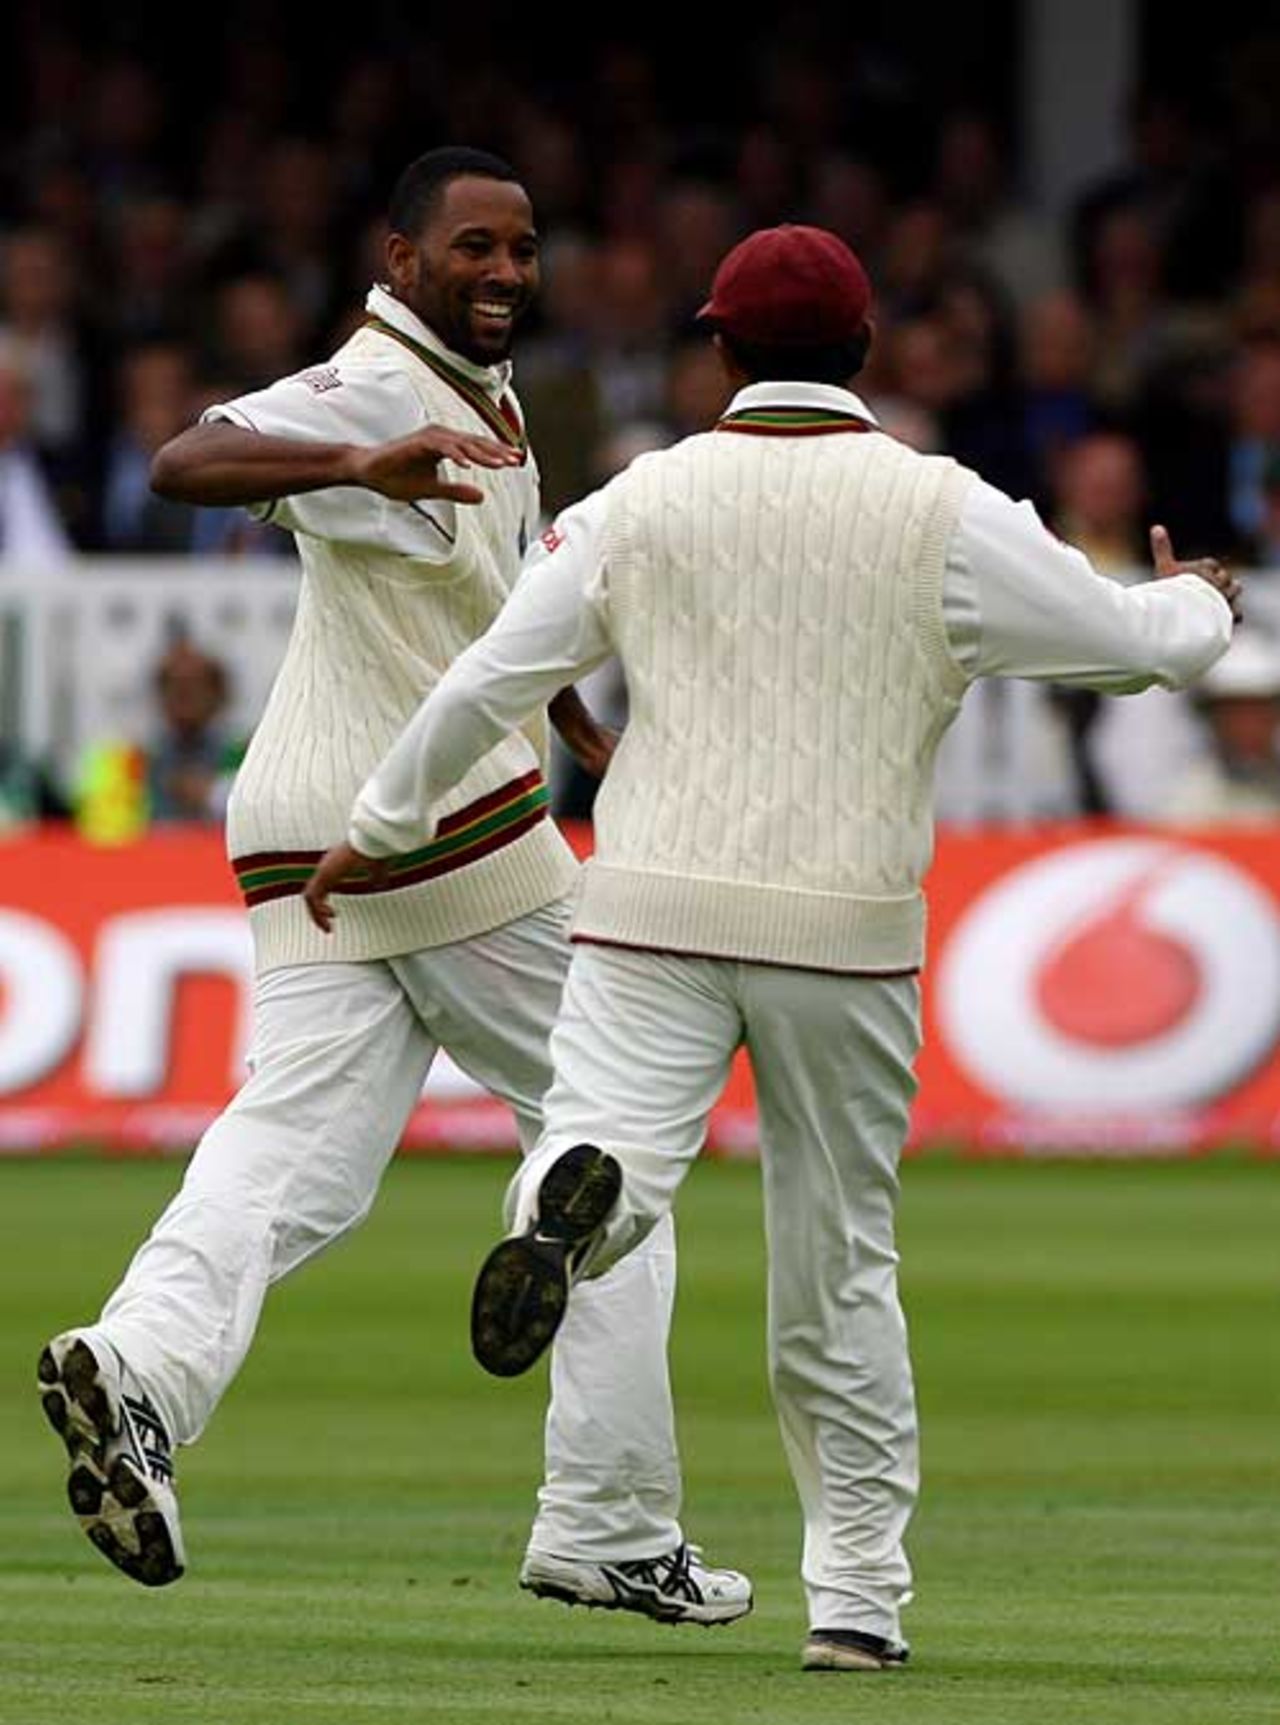 Corey Collymore gained the key wicket of Kevin Pietersen, England v West Indies, 1st Test, Lord's, May 17, 2007